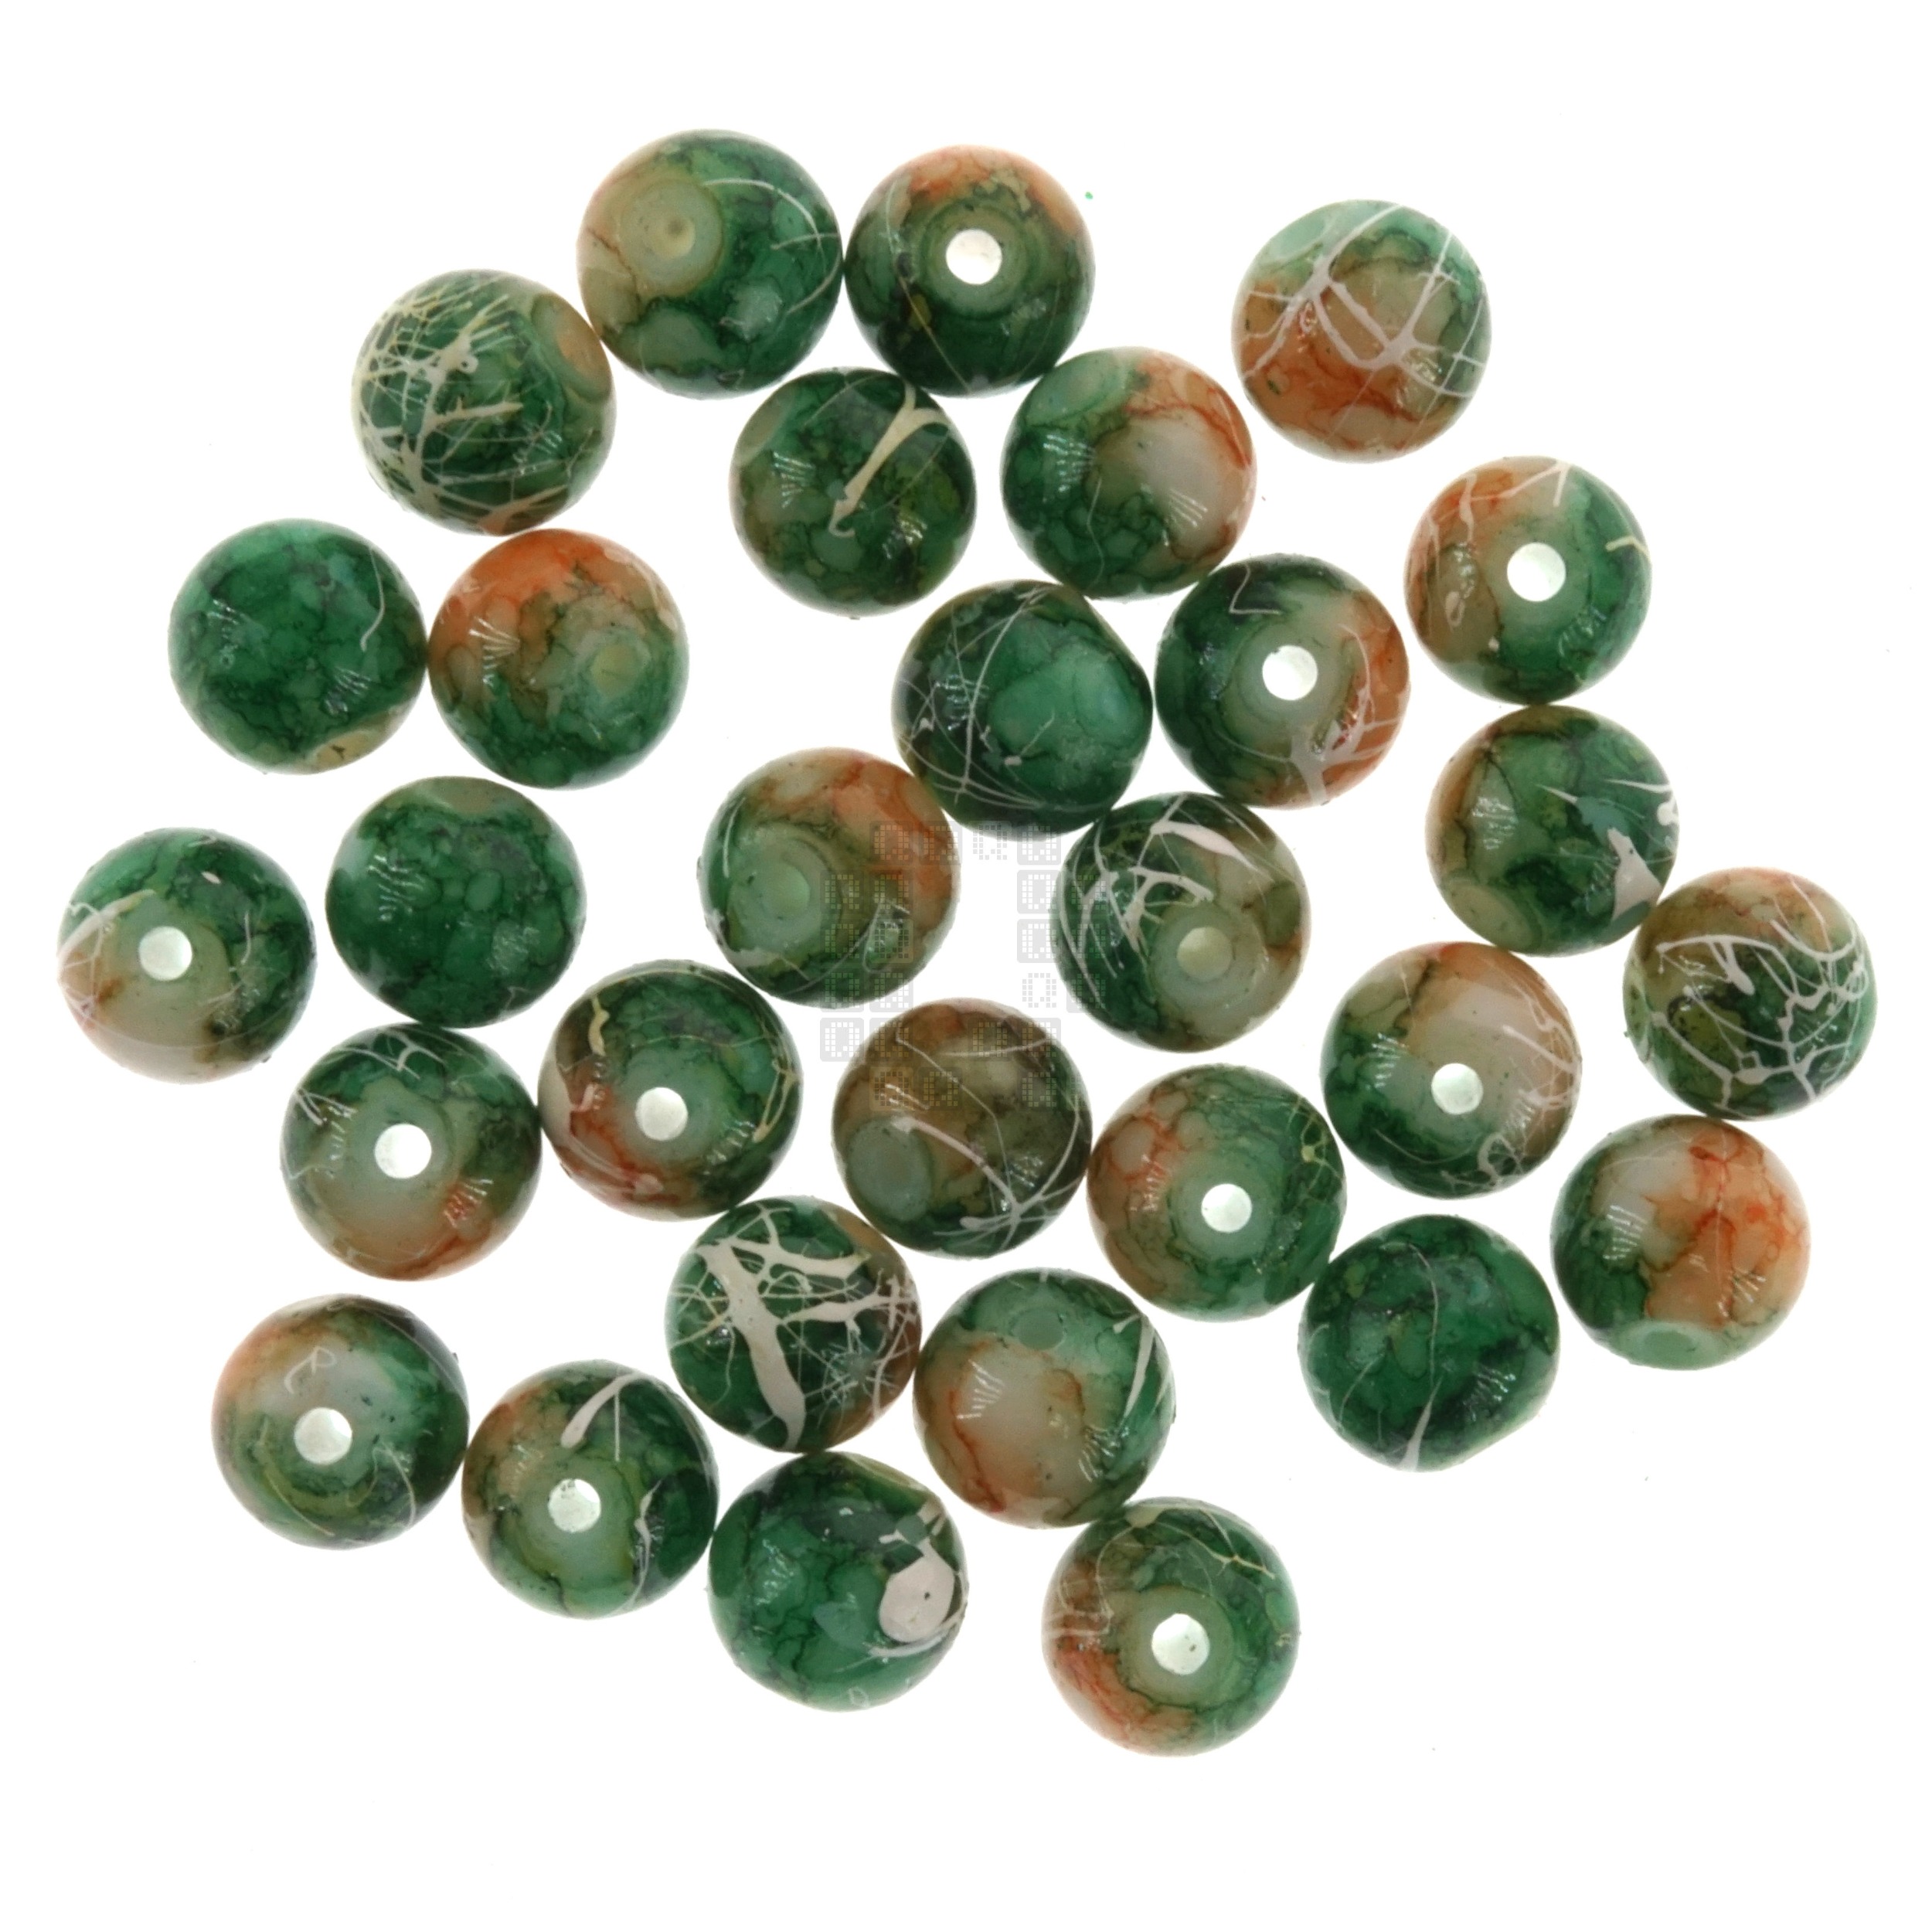 Forest 8mm Loose Glass Beads, 30 Pieces